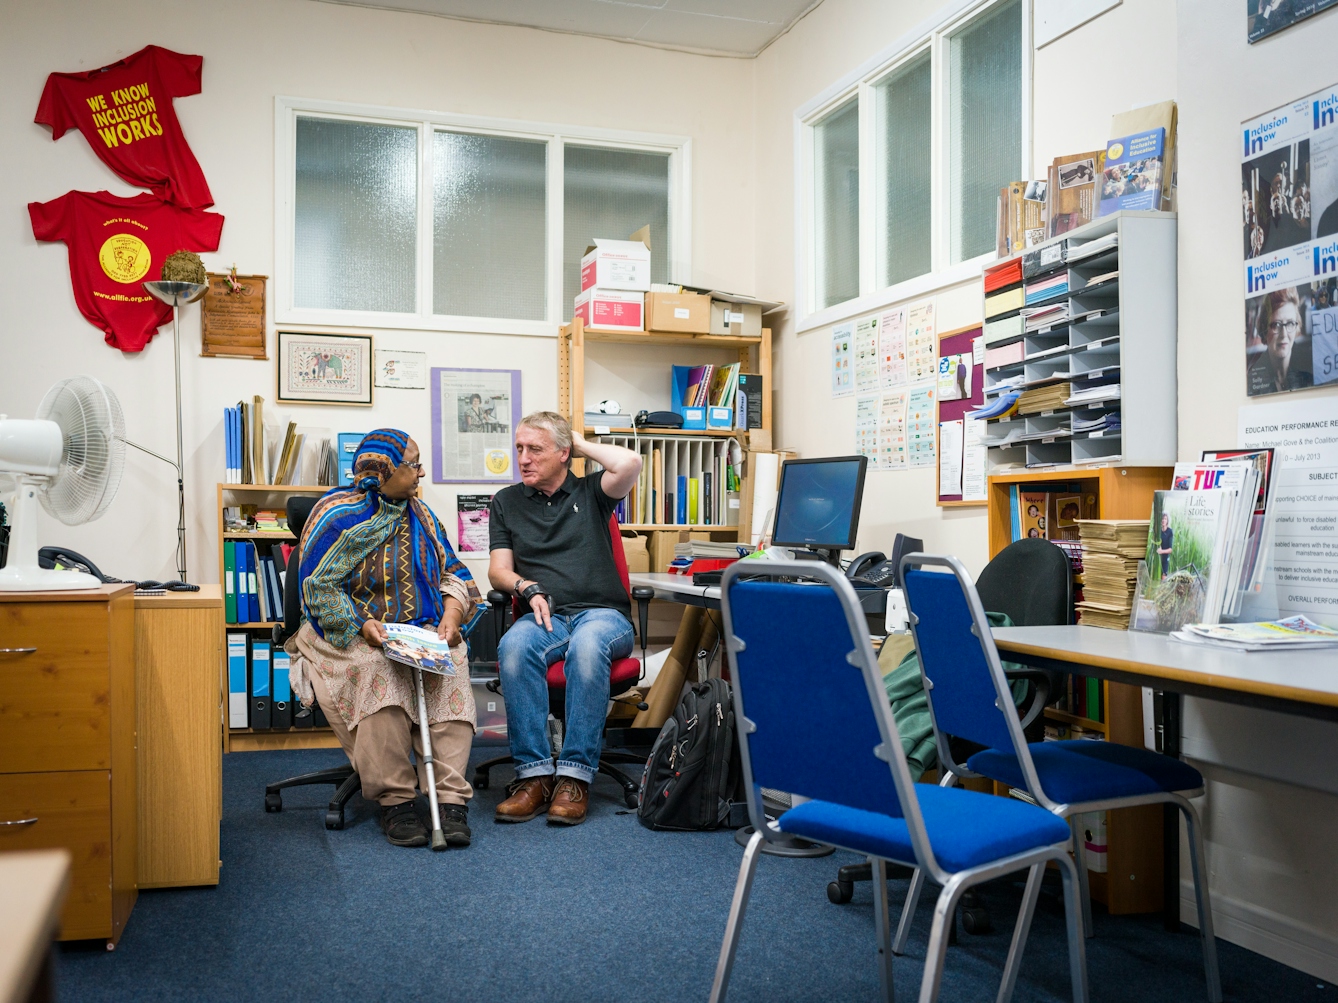 Photograph of Sarifa Patel talking with another Trustee of the charity, ALLFIE.